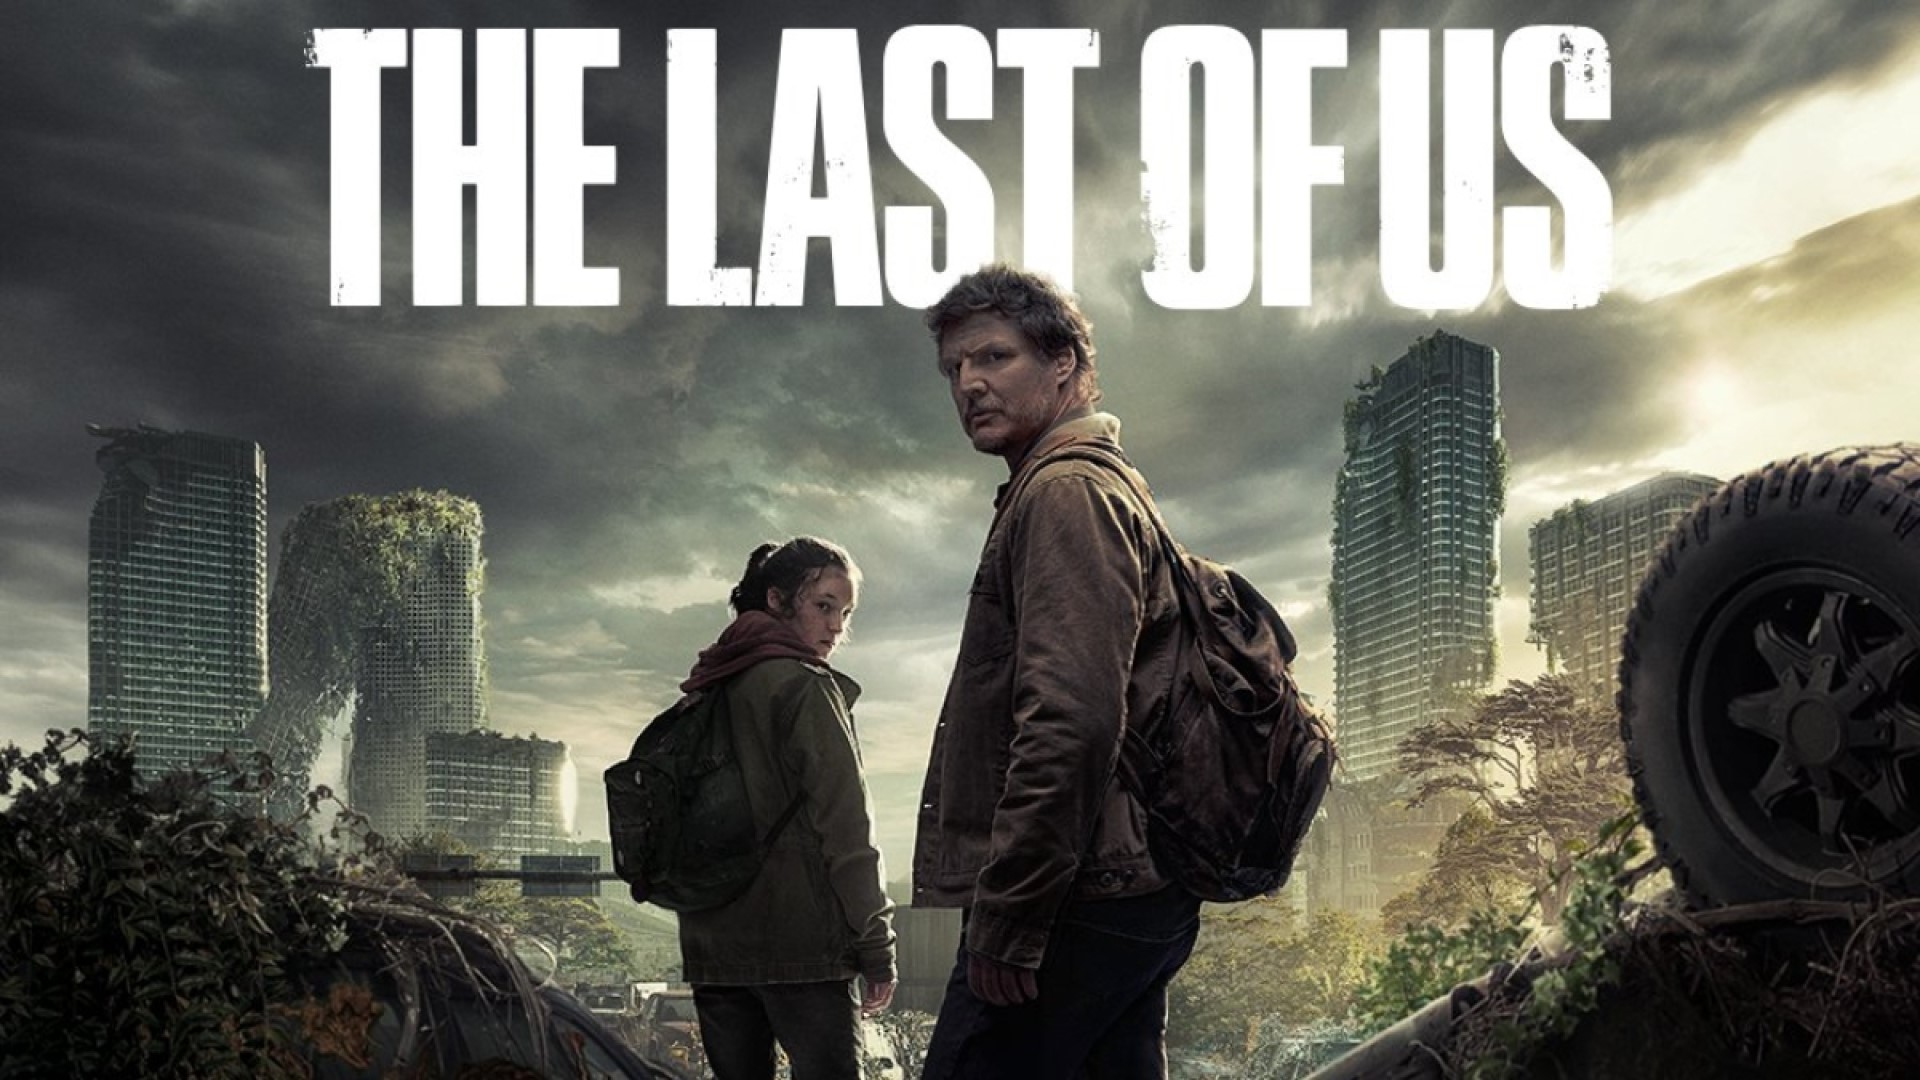 HBO's The Last of Us is getting a season 2